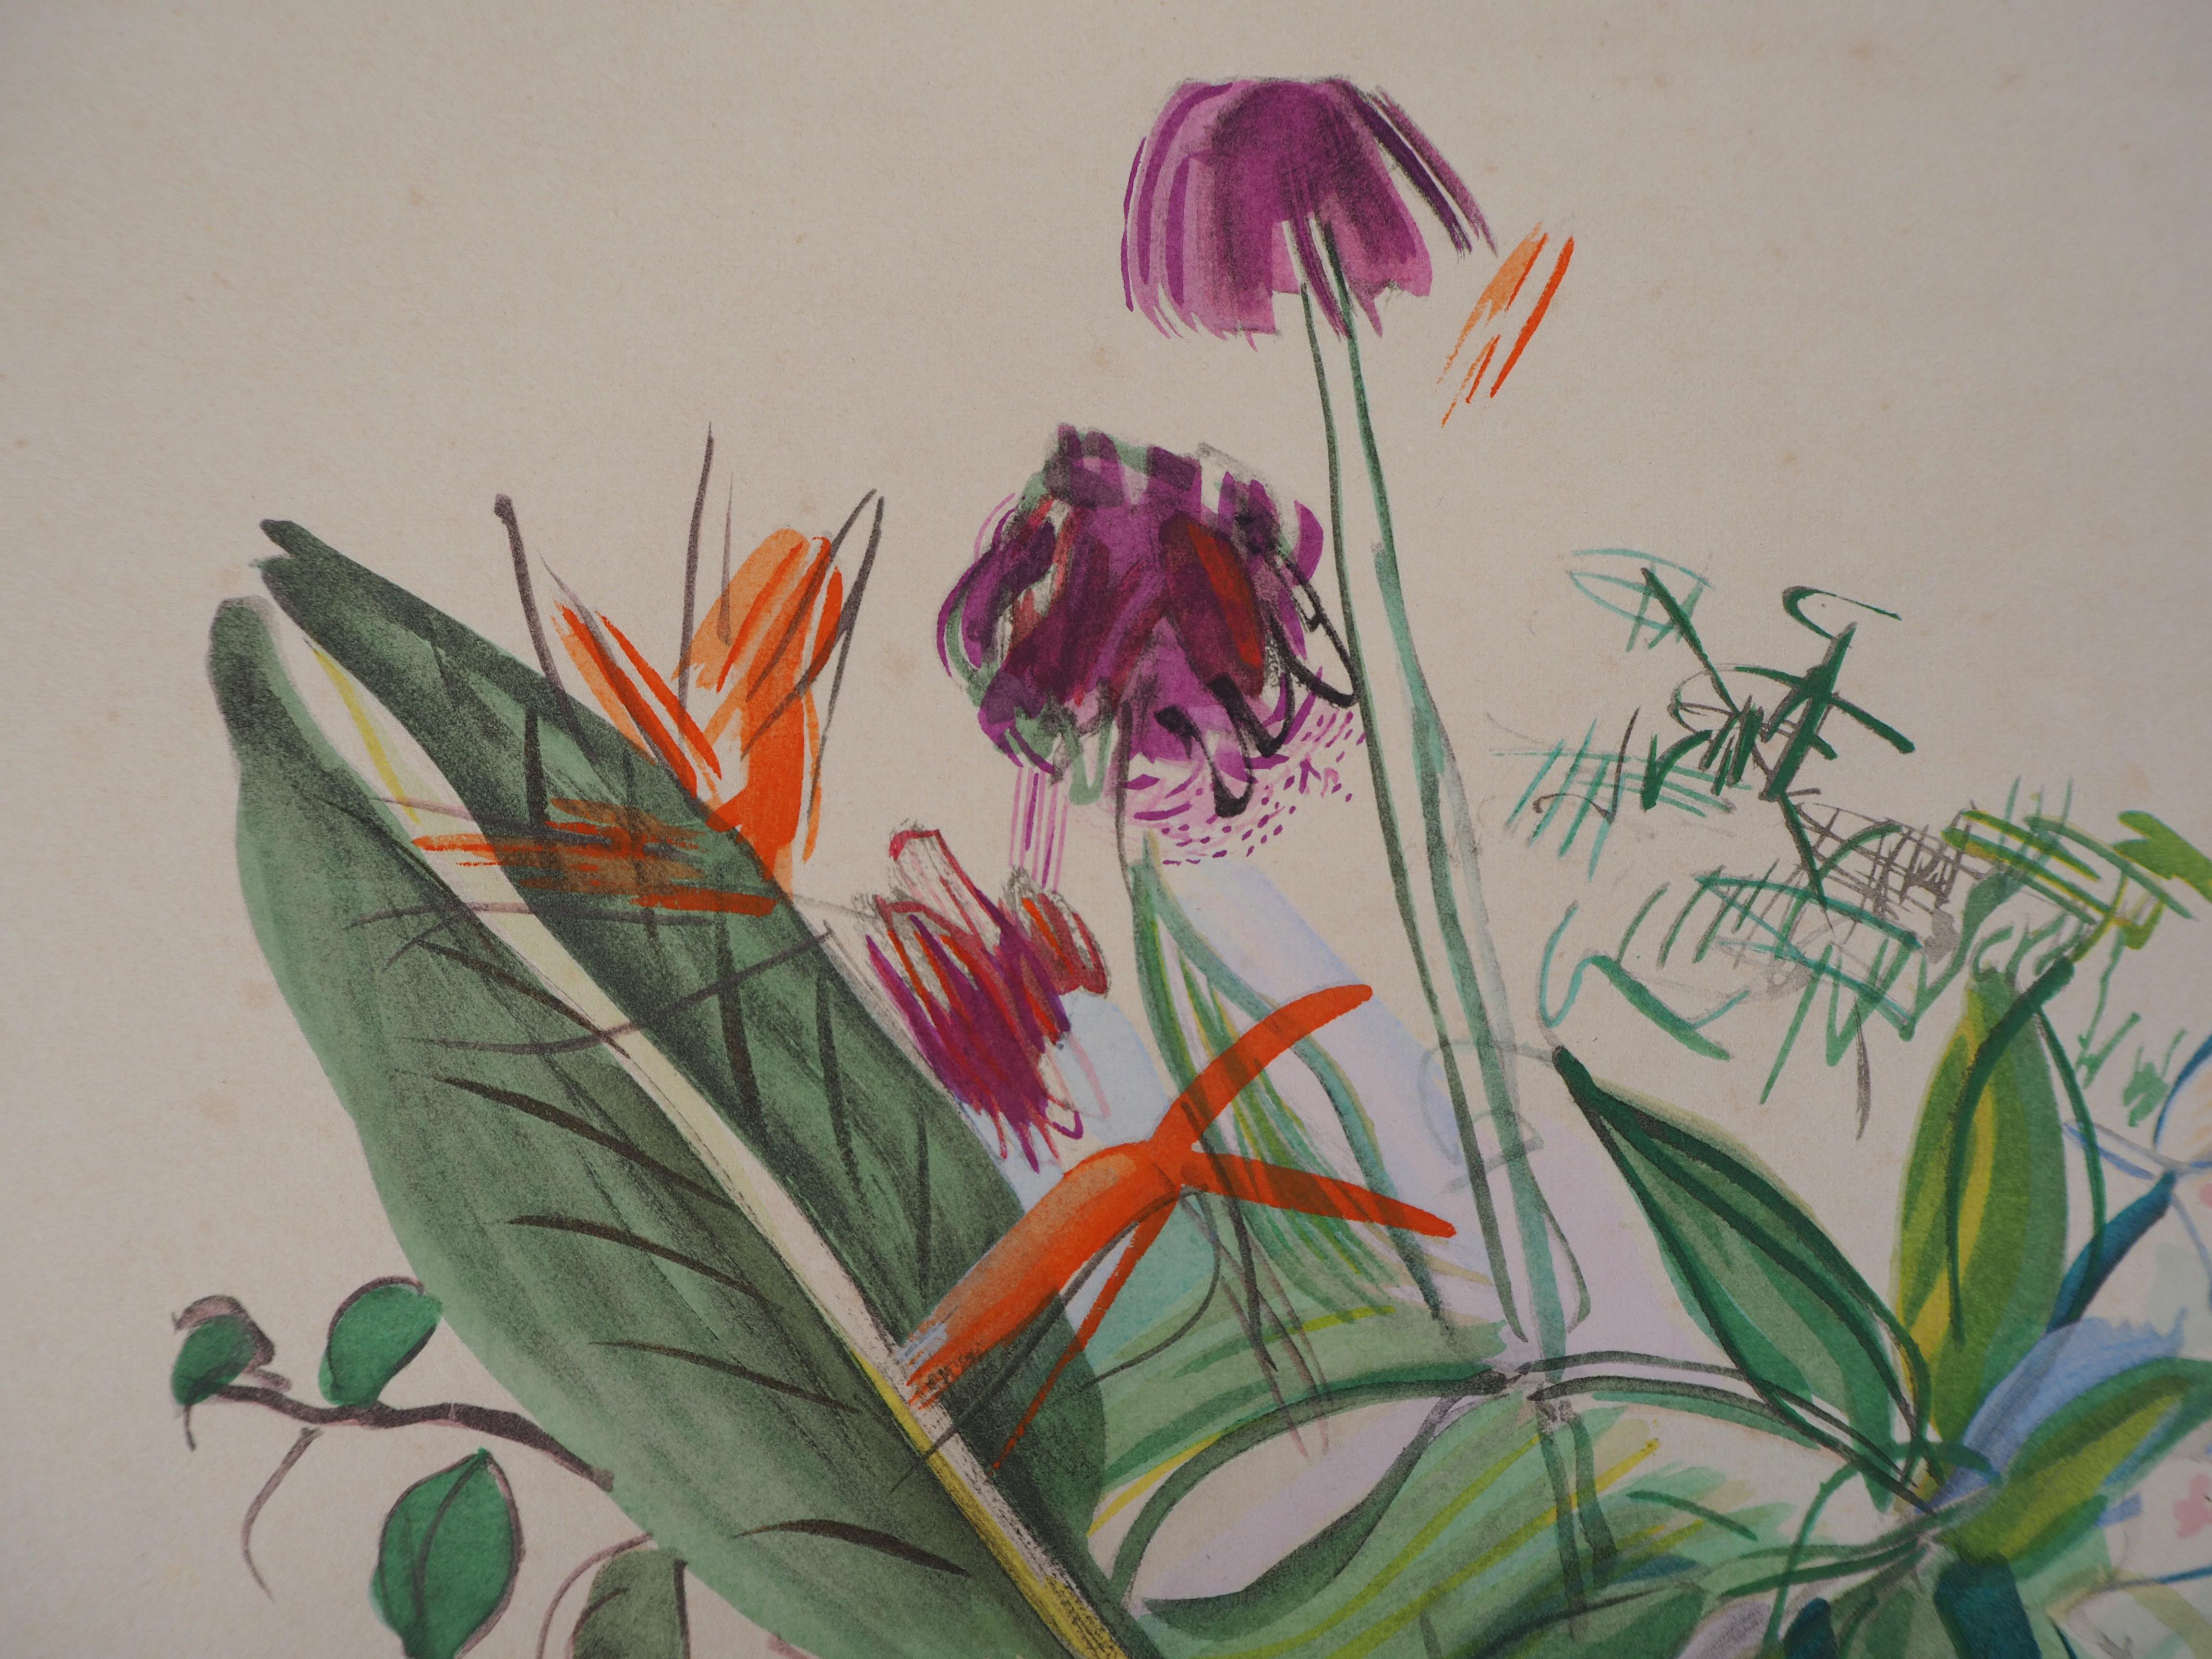 Raoul DUFY
Bunch of Flowers, 1953

Original Lithograph with stencil watercolor
With printed signature in the plate
On Arches vellum
28 x 37.5 cm (c. 11 x 14.8 inch)

Very good condition